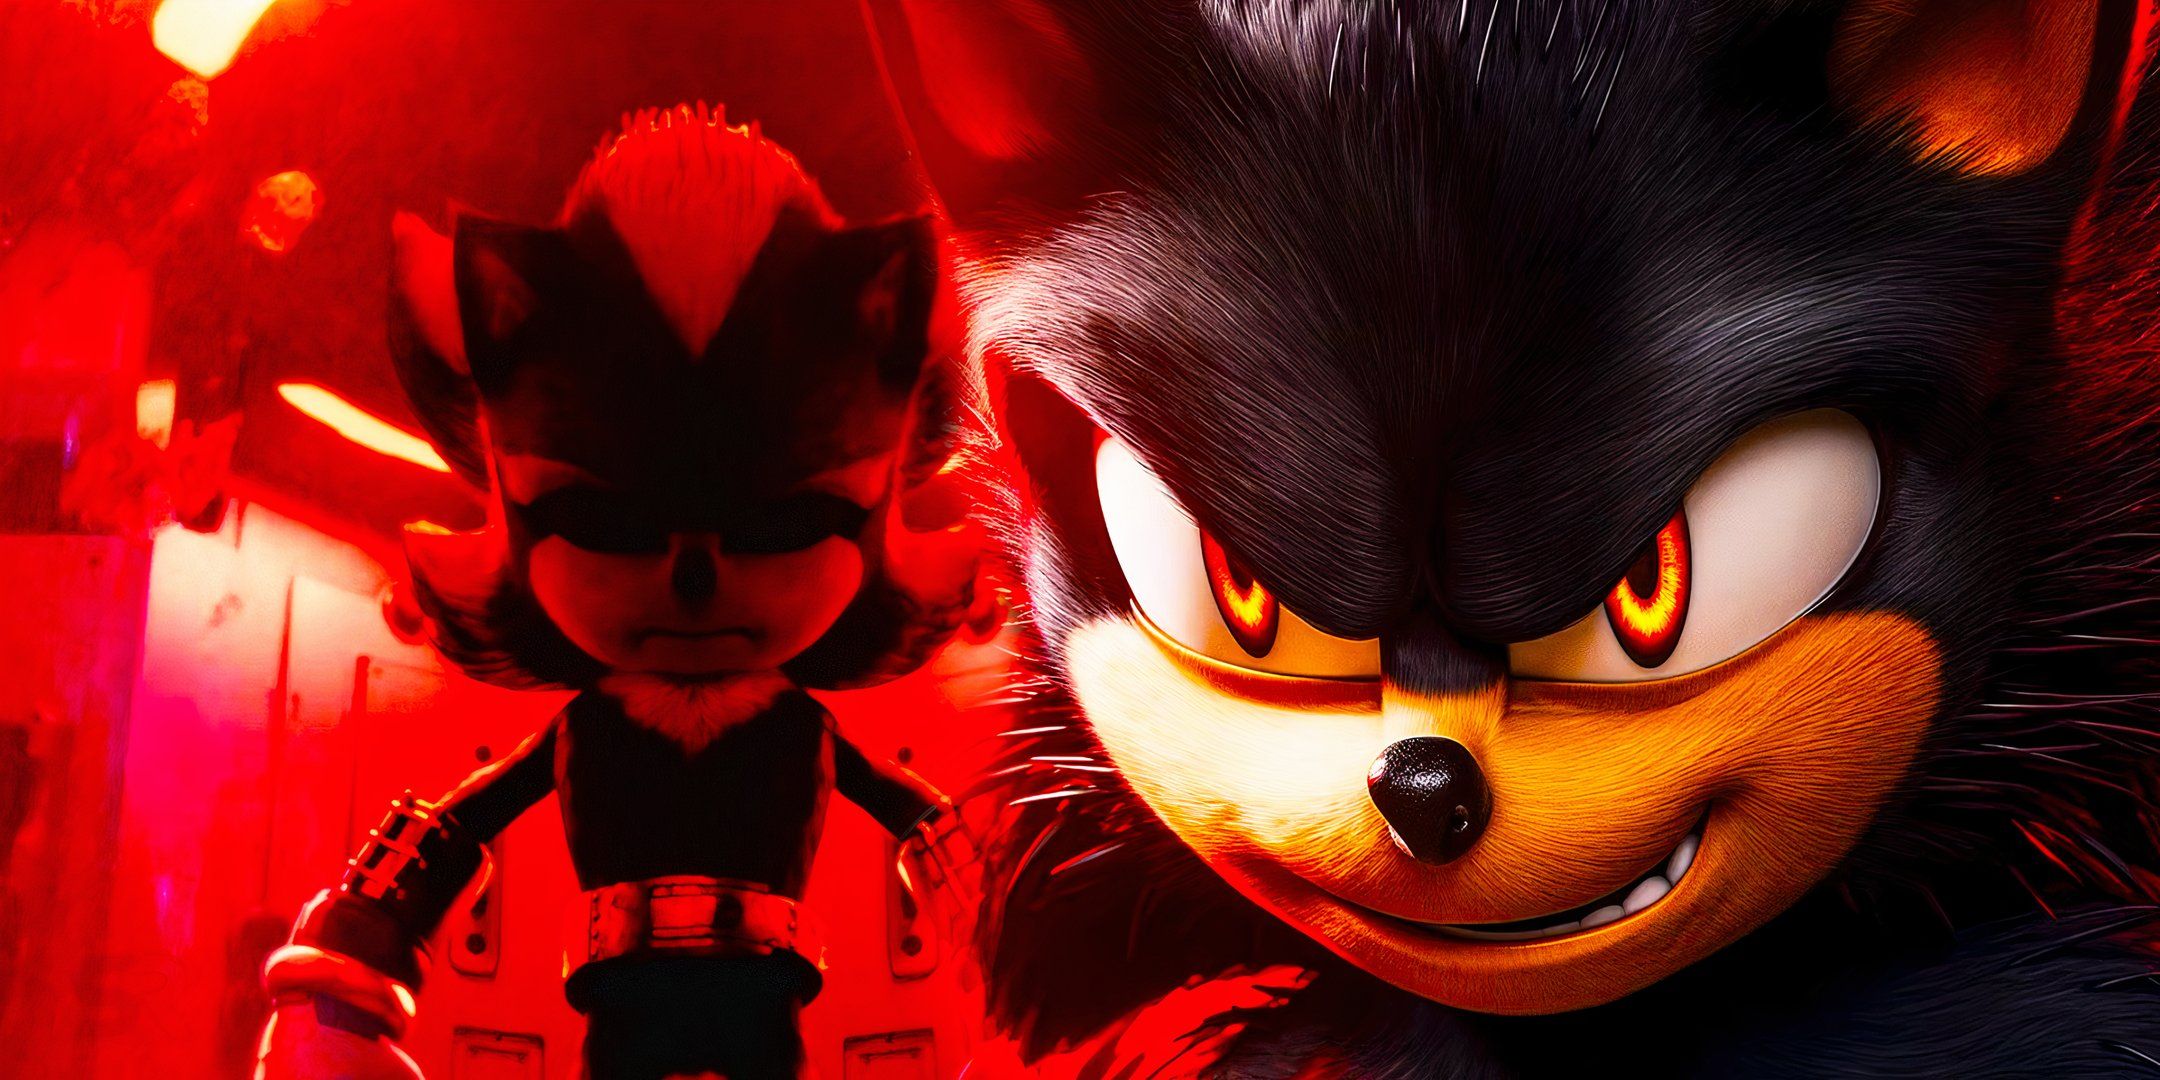 Shadow the Hedgehog in the Sonic the Hedgehog movies